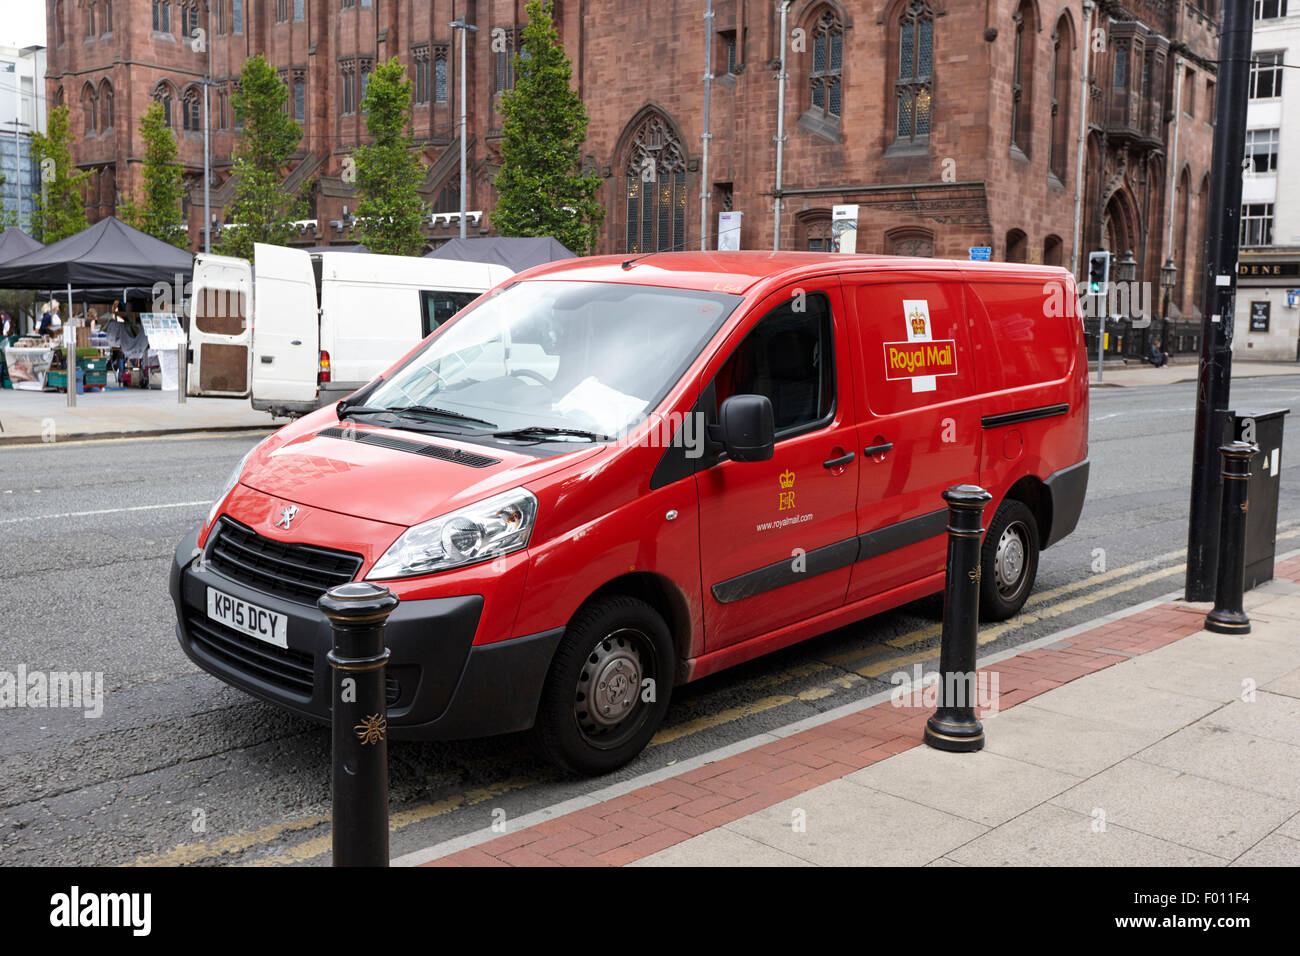 royal mail peugeot delivery van on double yellow lines Manchester city centre England UK Stock Photo